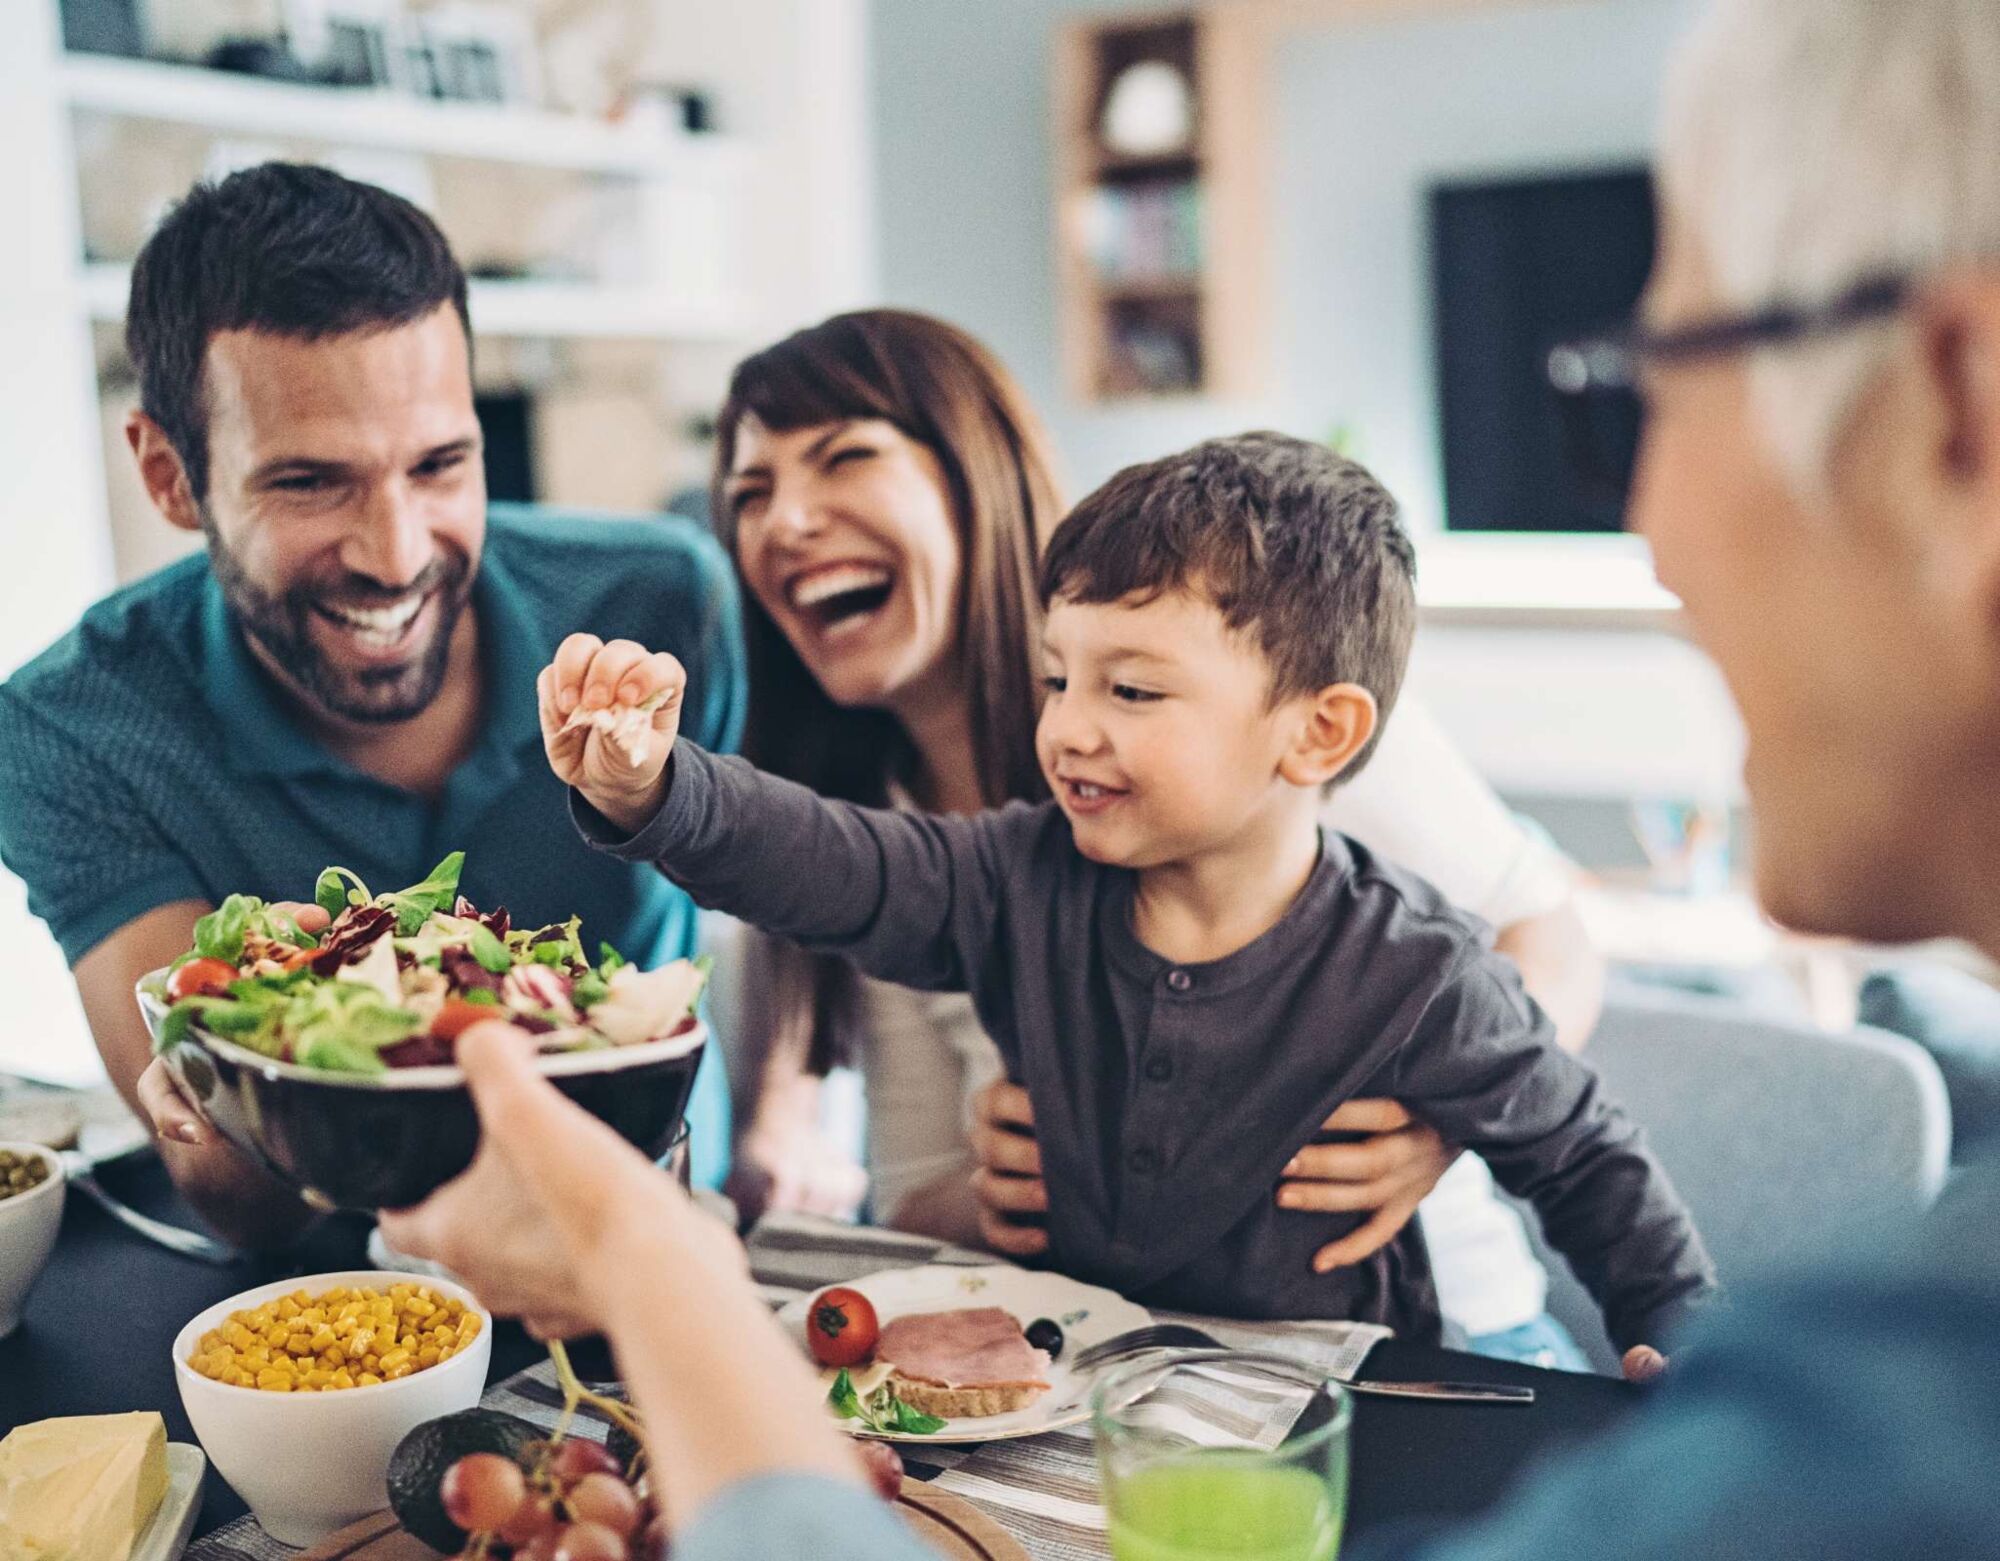 A toddler takes a leaf out of a salad bowl at the dining table surrounded by his parents and grandparents.